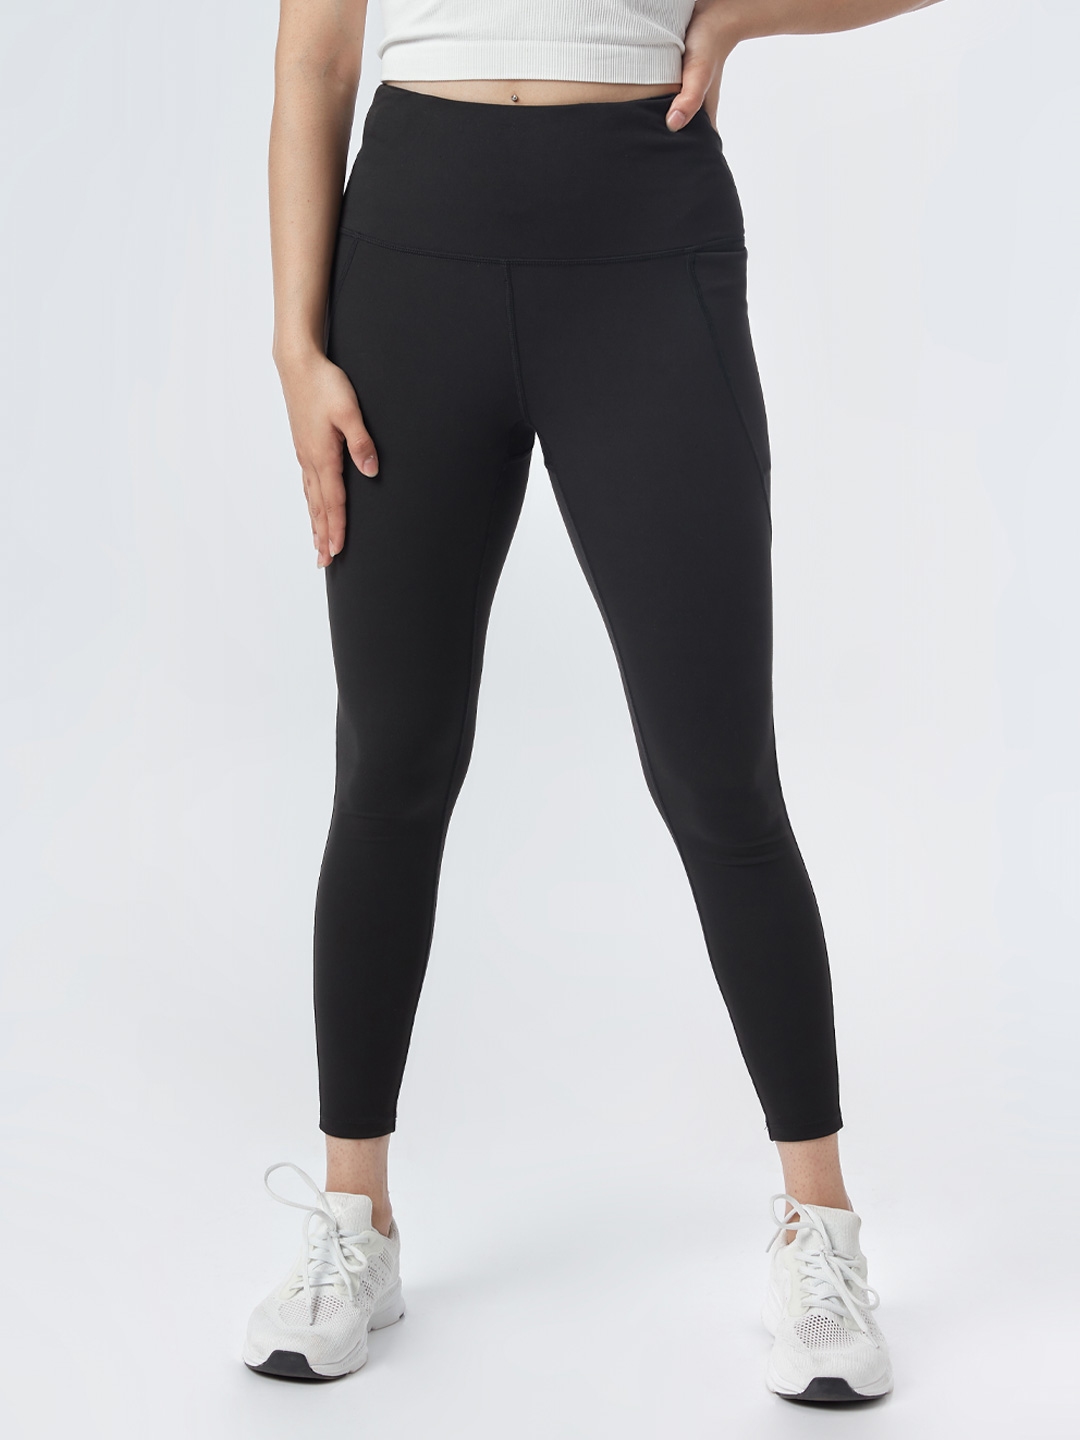 Buy Blissclub Women Black Super Stretchy & High Waisted The Ultimate ...